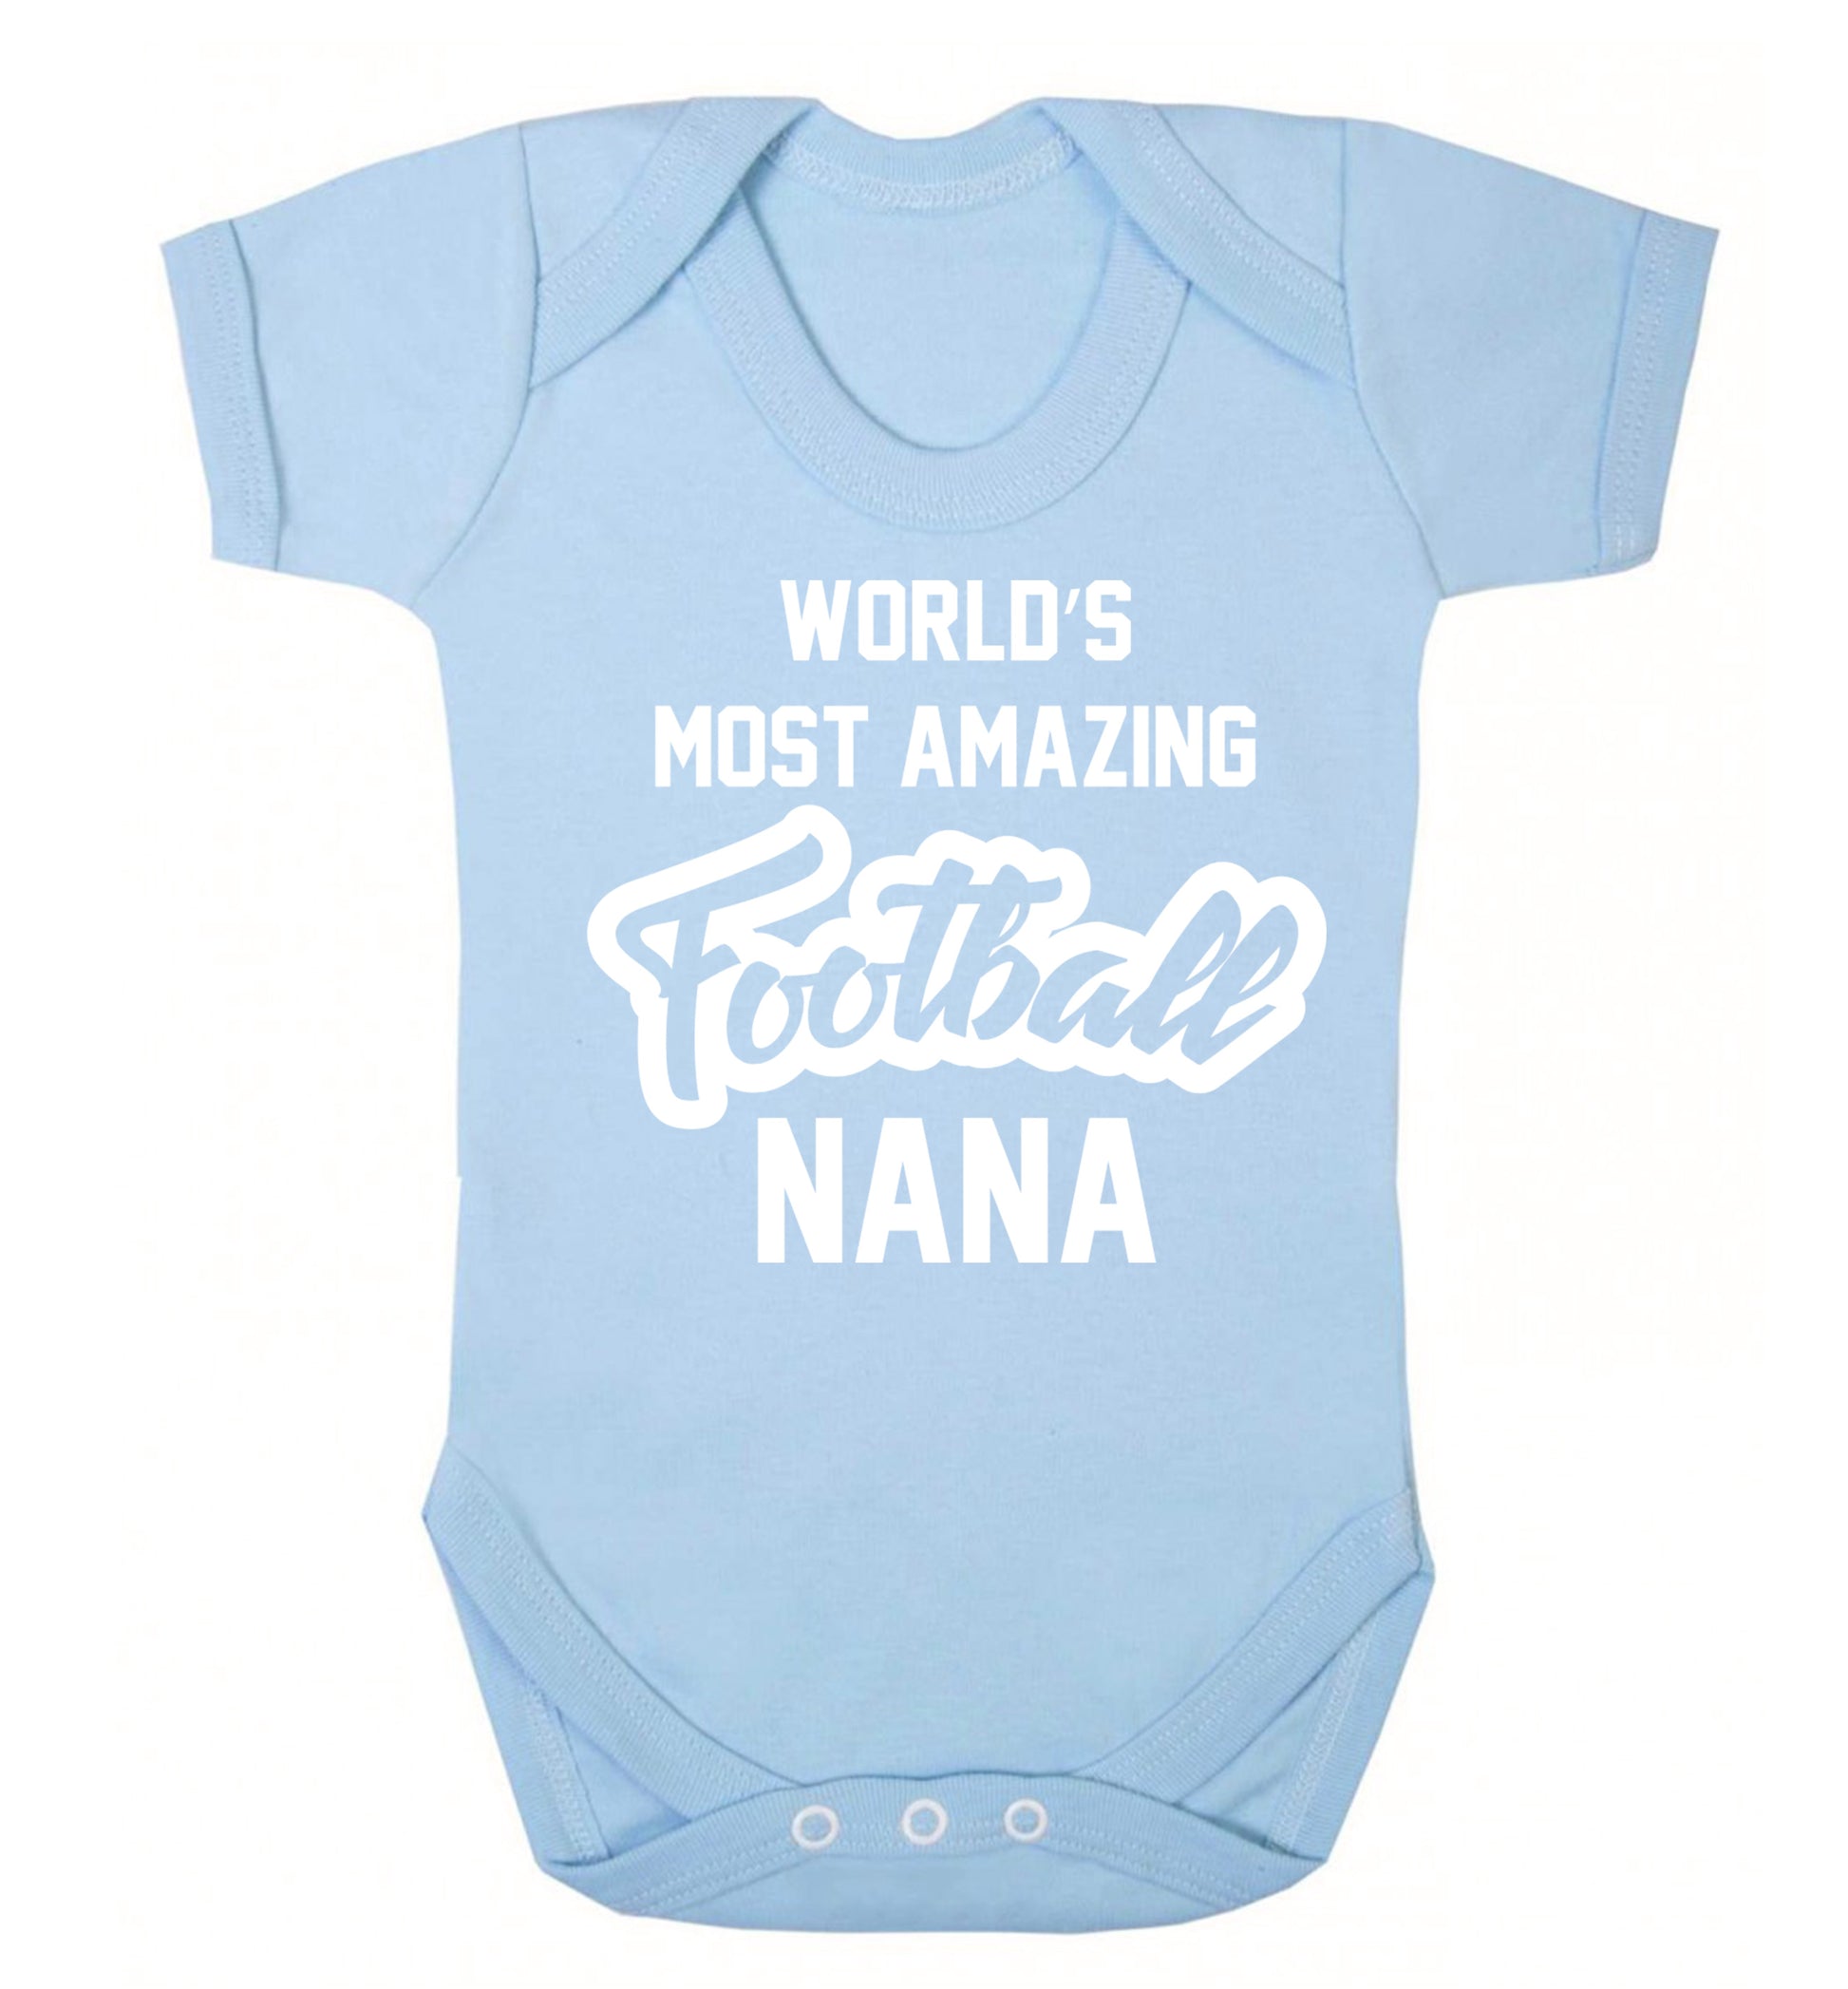 Worlds most amazing football nana Baby Vest pale blue 18-24 months